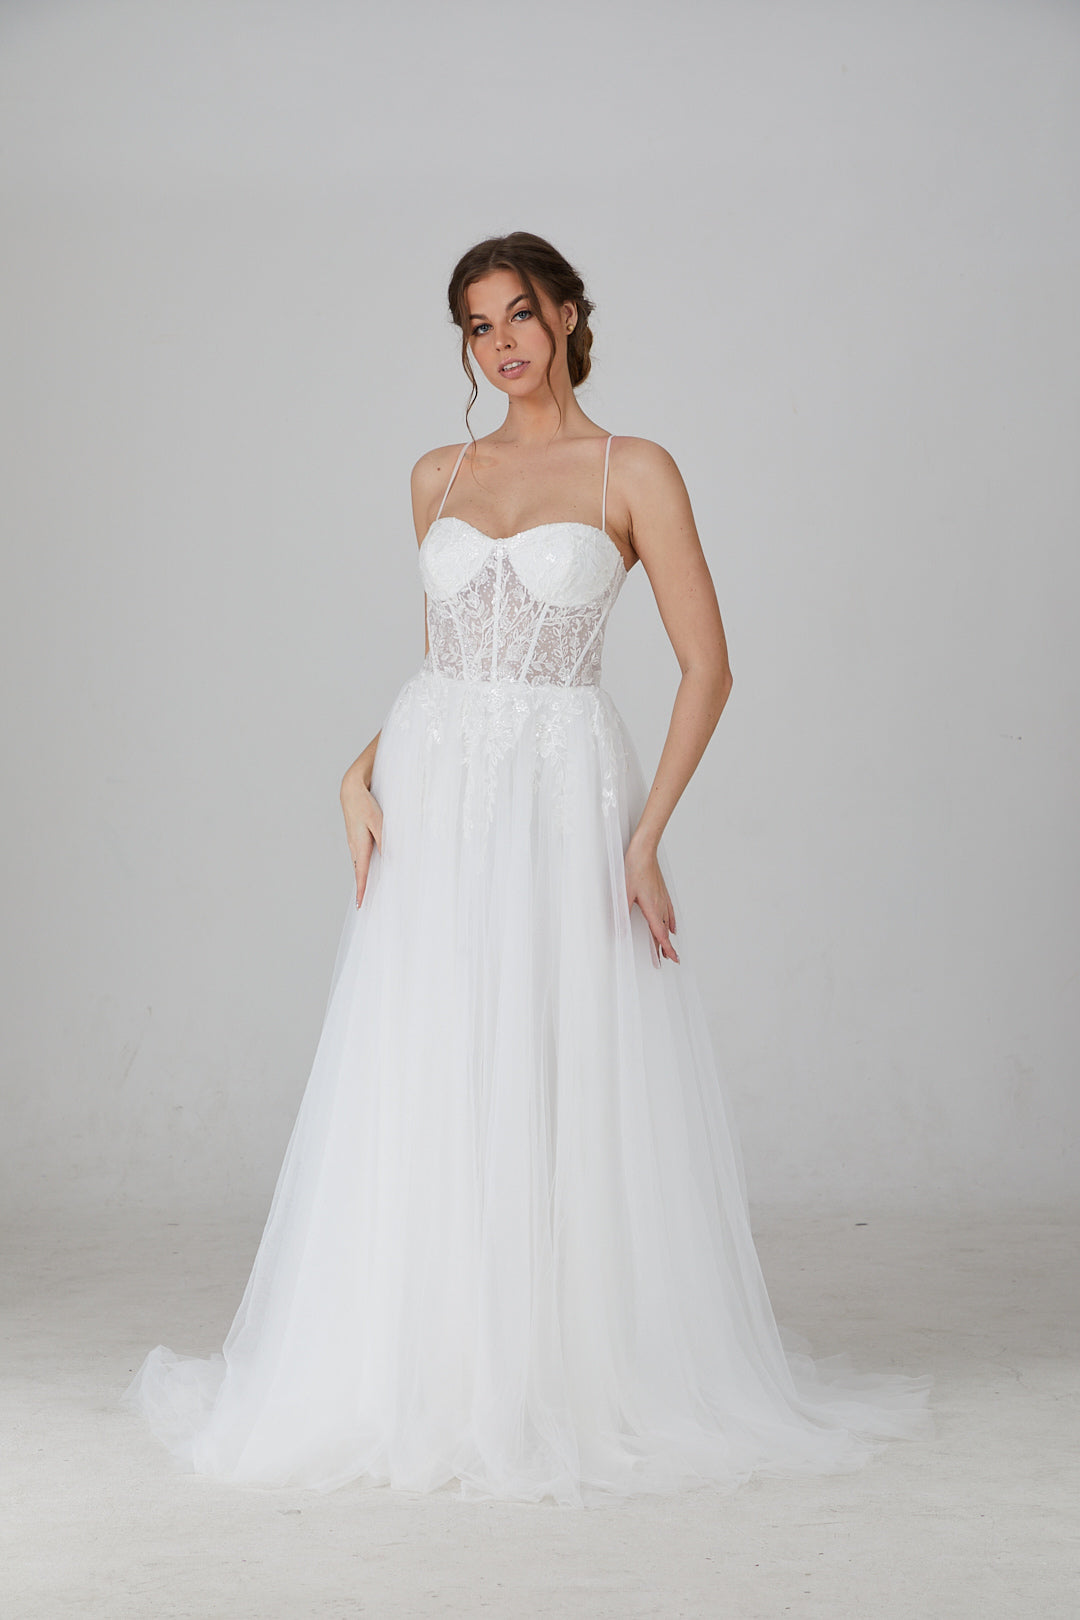 BelleAmour Couture ALESSANDRA White Tulle Bustier A Line Bridal Gown